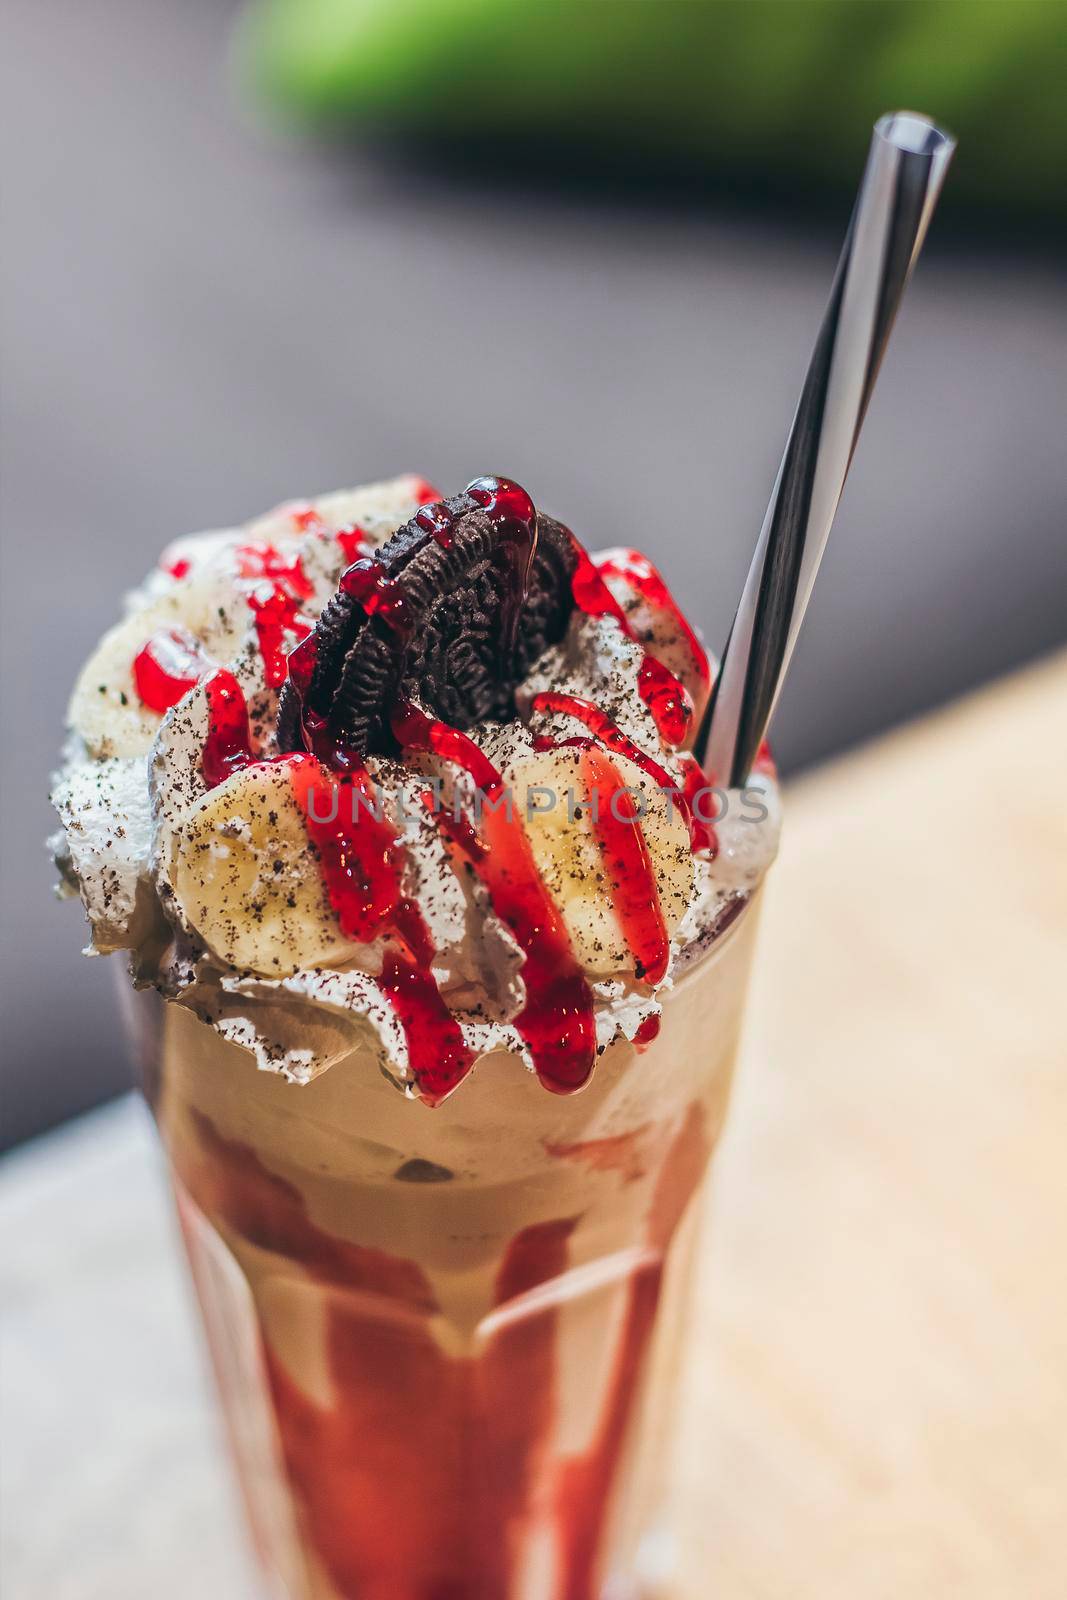 A glass with delicious coffee ice cream red shake.